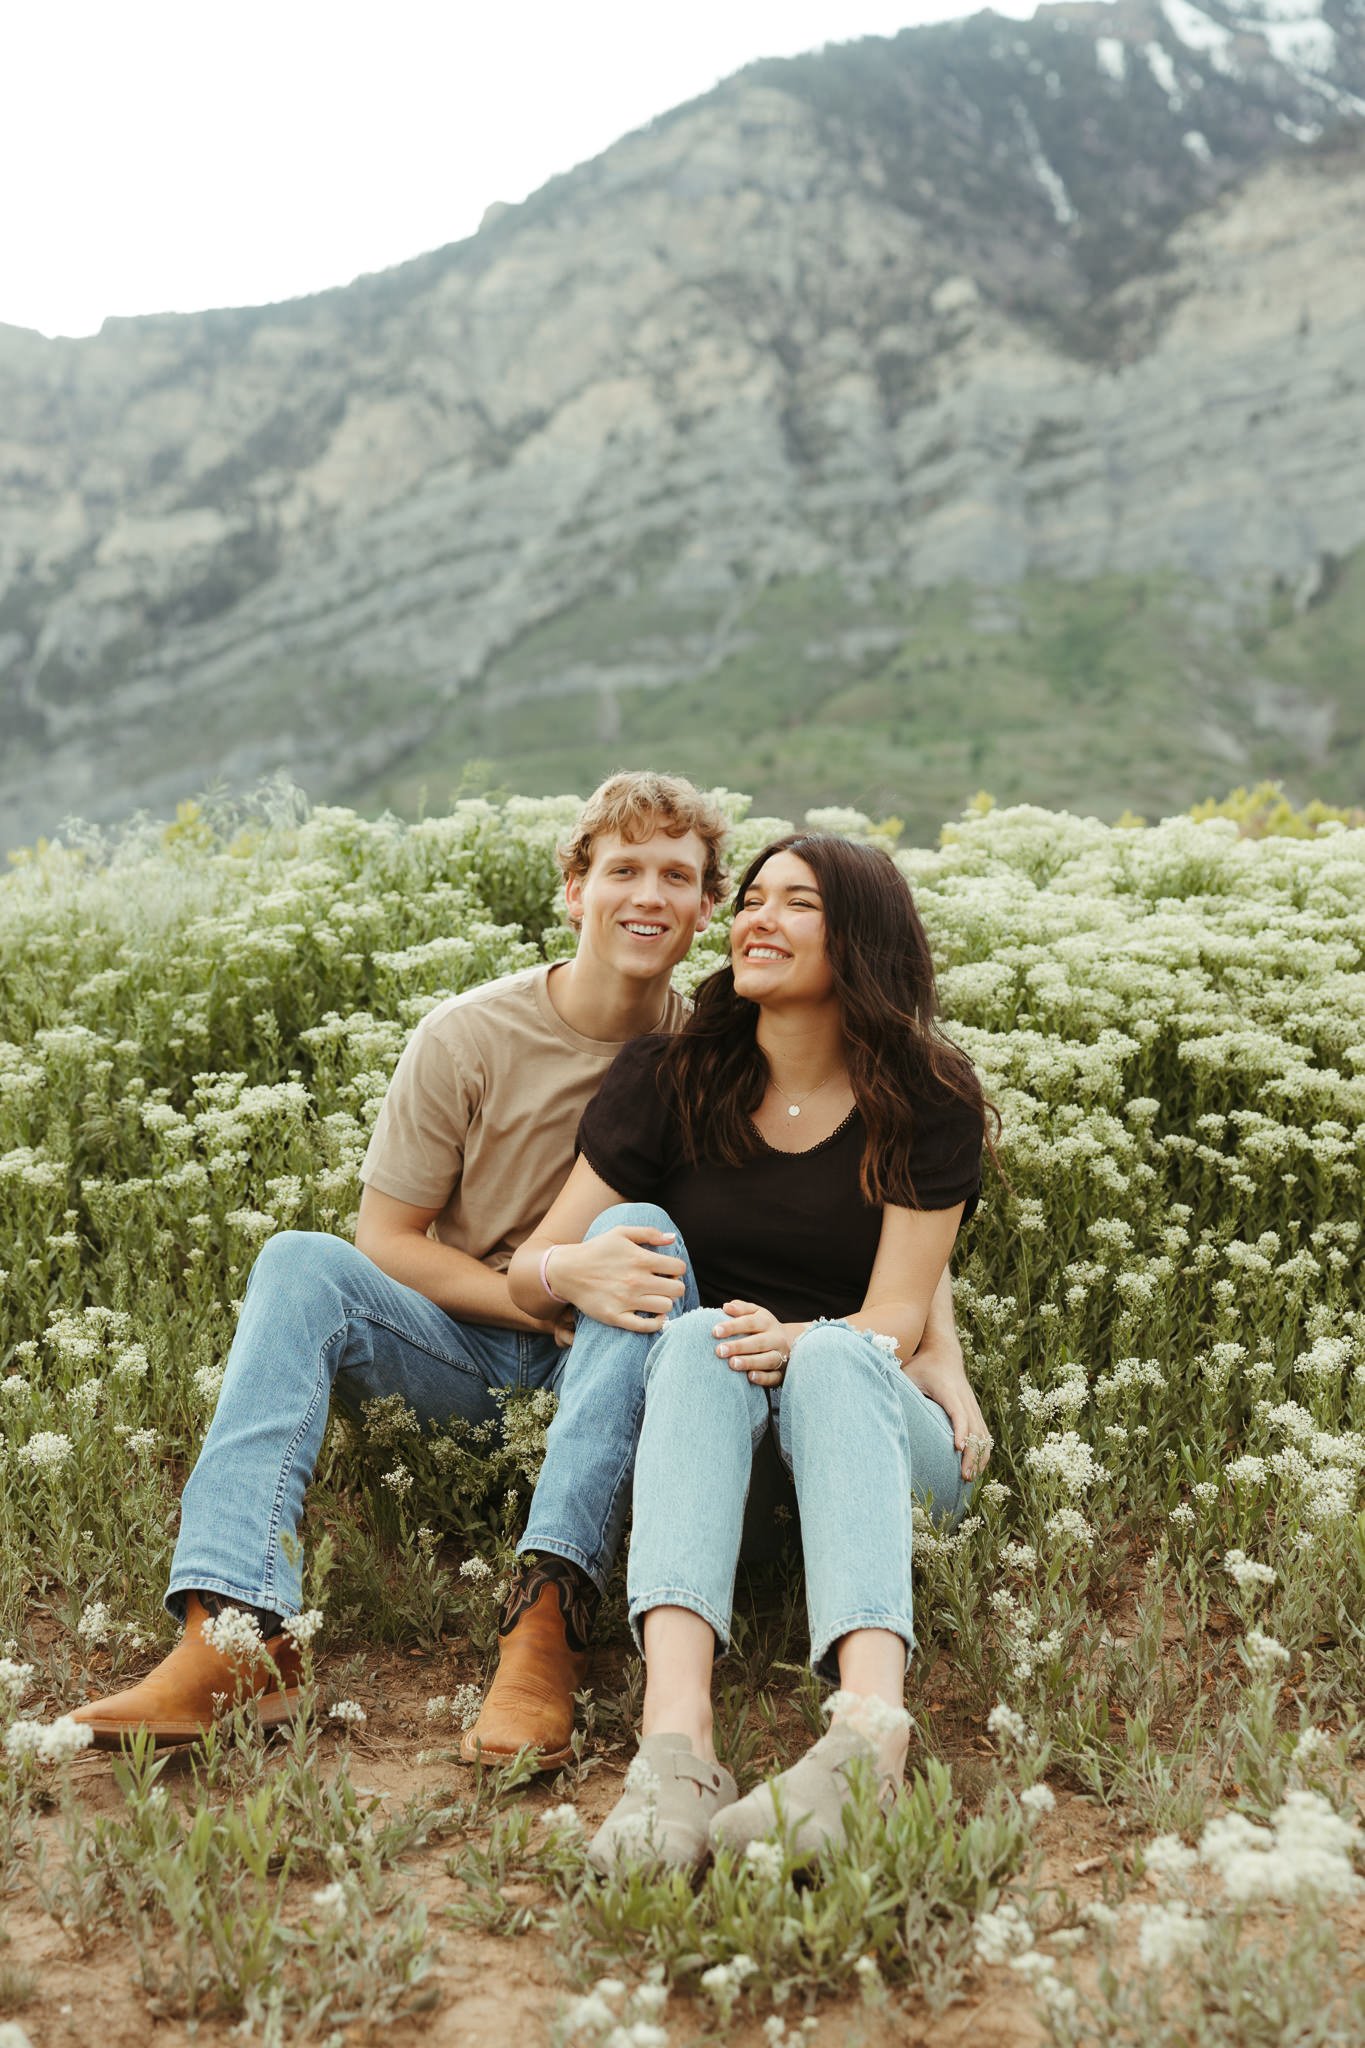 Spring-Provo-Canyon-Wildflowers-Engagement-Session-17